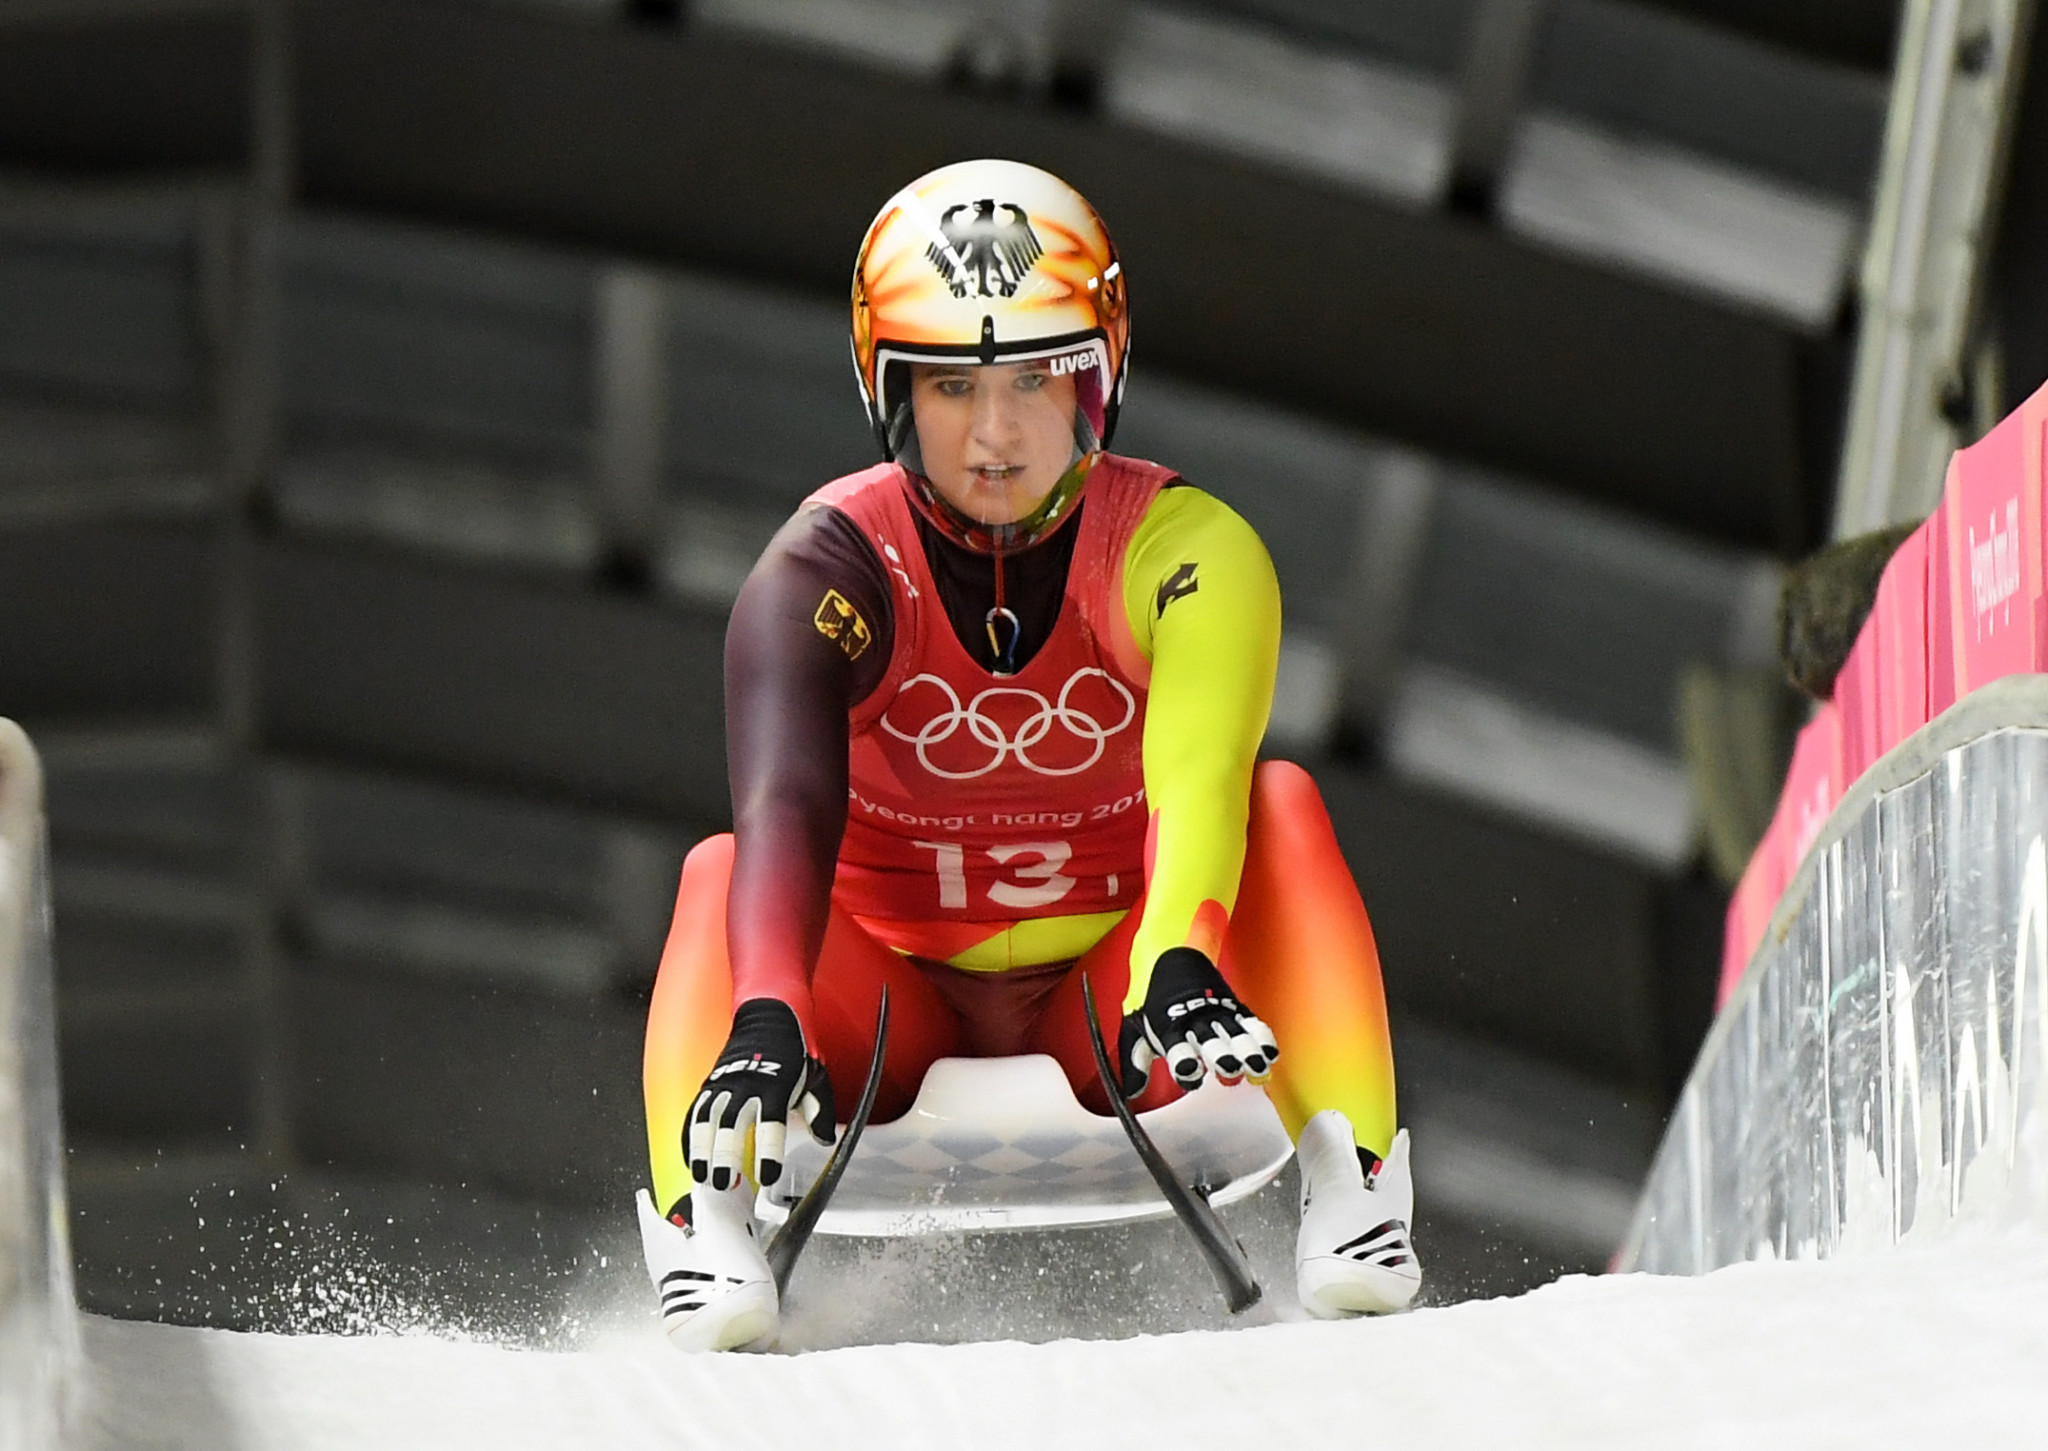 Germany's Natalie Geisenberger is poised to compete at Beijjing 2022 chasing a third consecutive Olympic luge title after receiving assurances from the IOC about COVID-19 protocols ©Getty Images